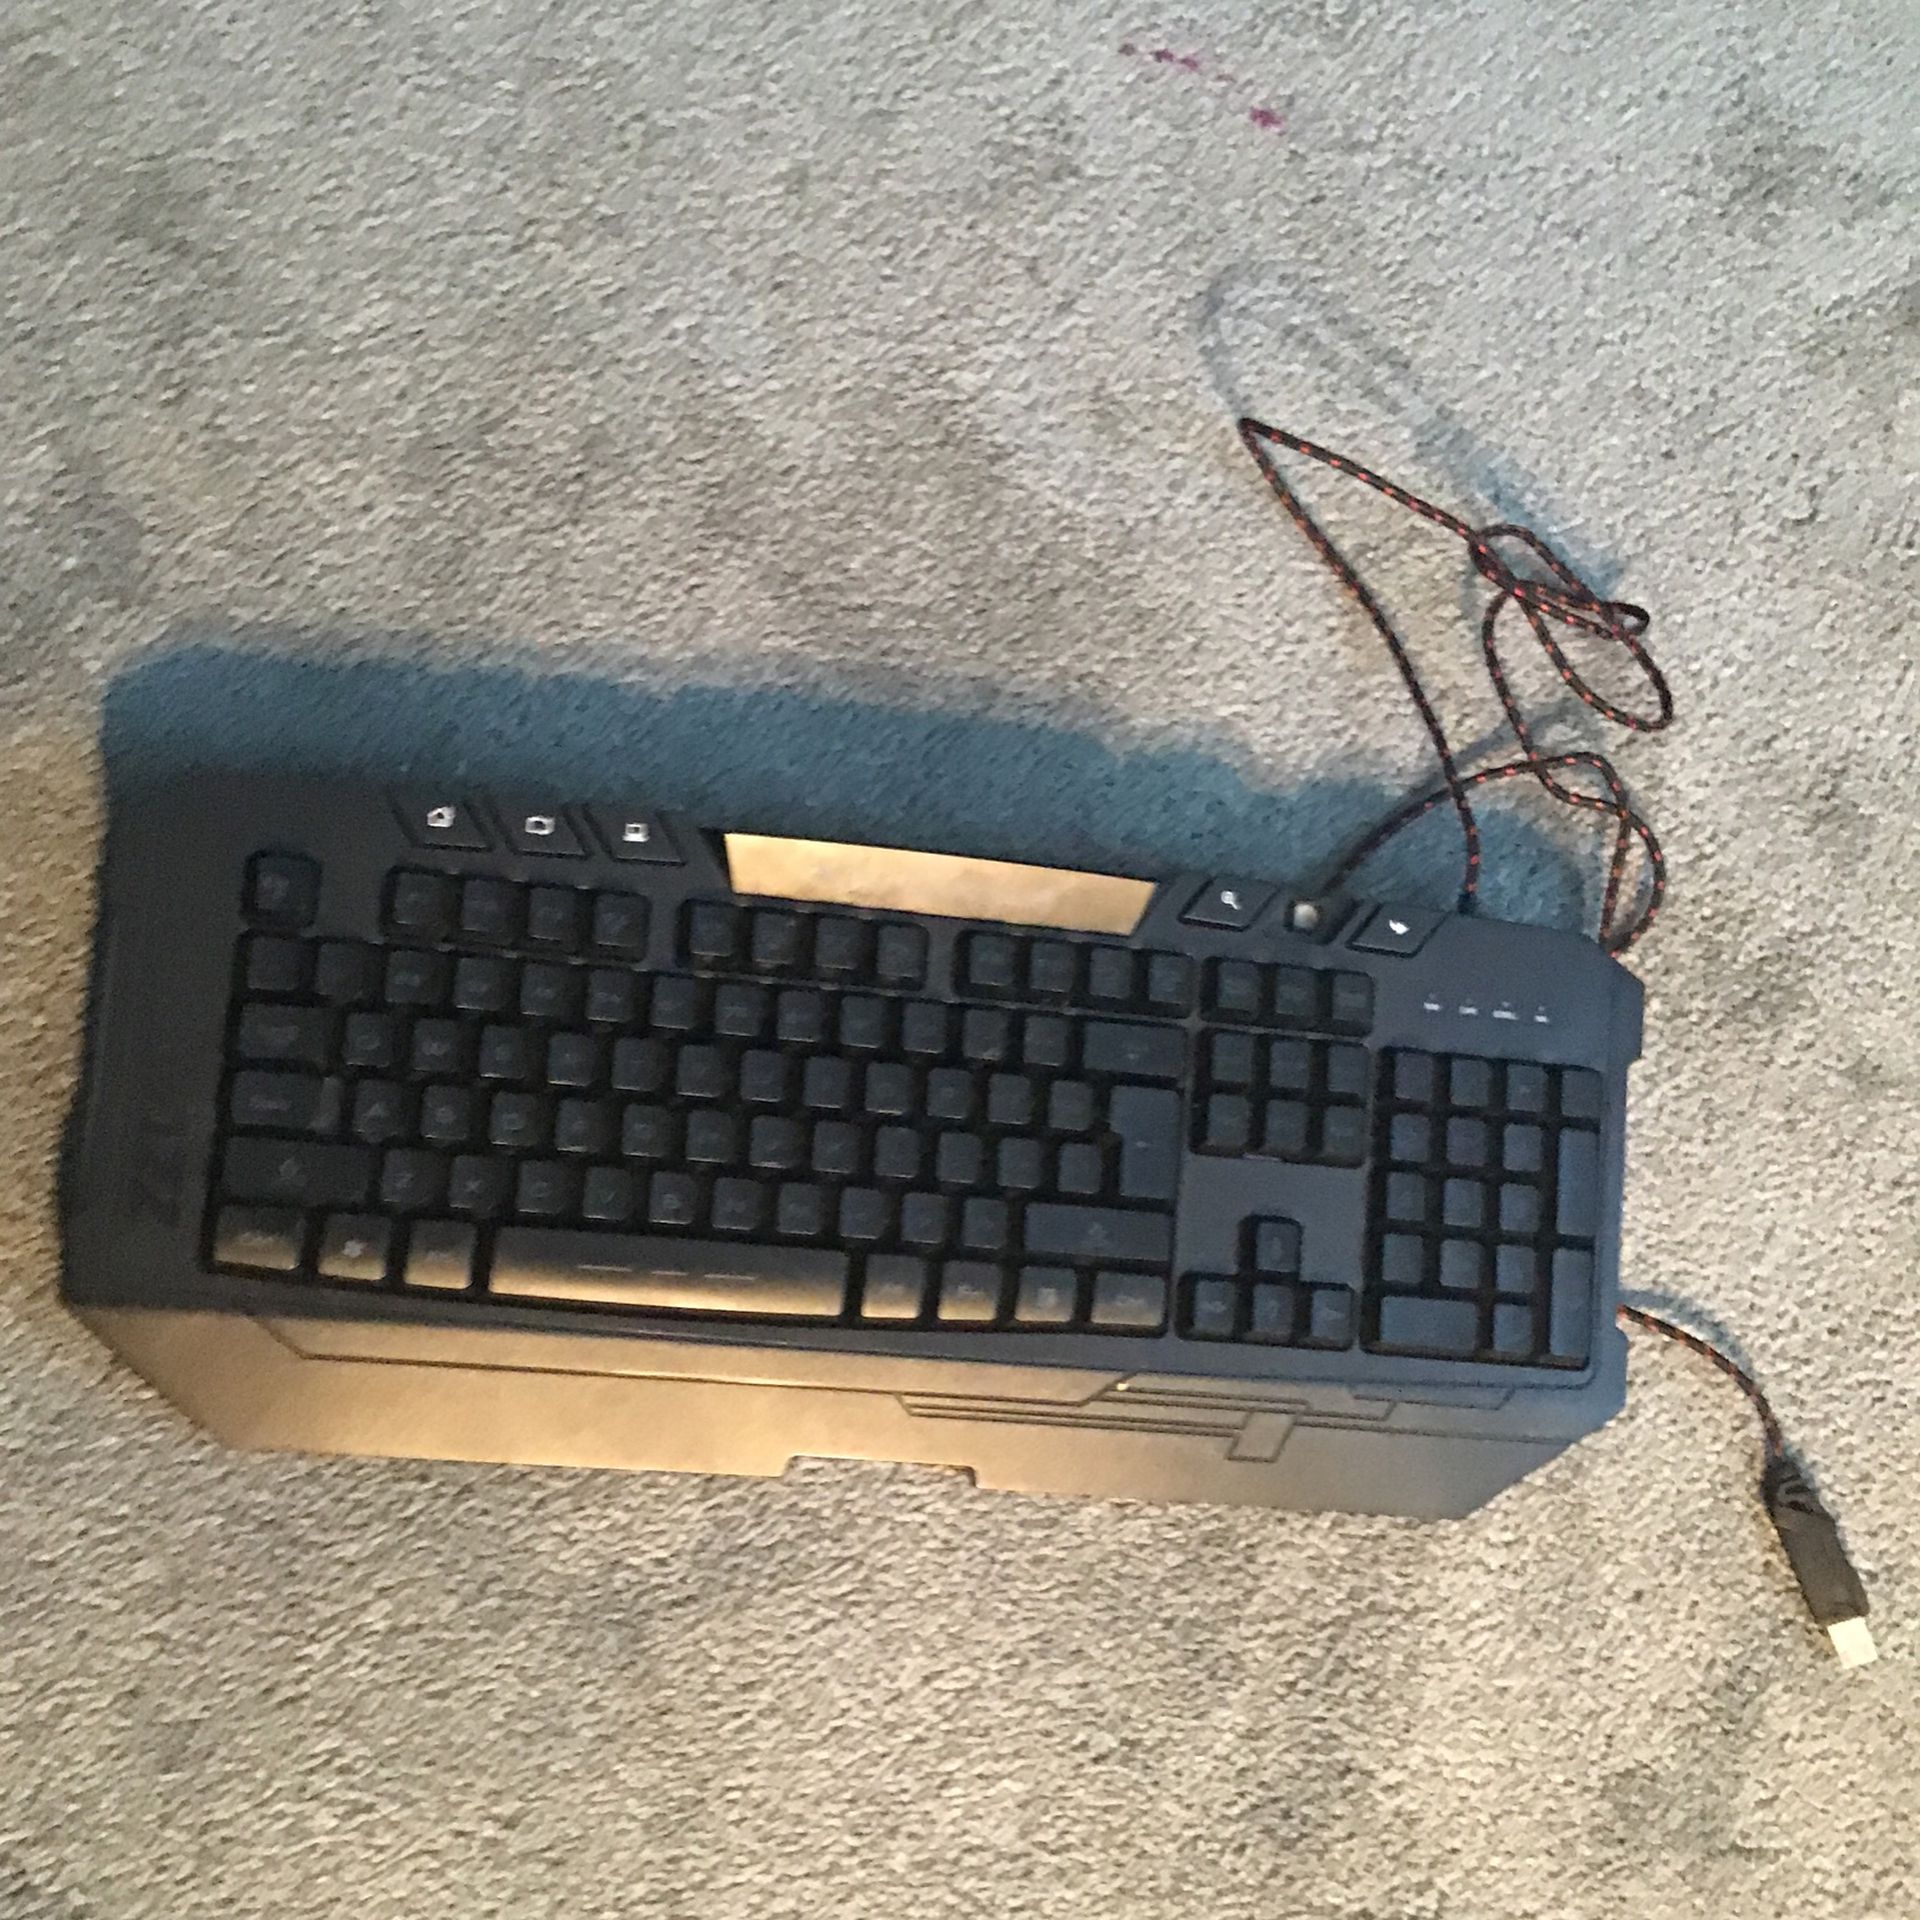 100% Gameing Keyboard In Good Condition Missing A Key